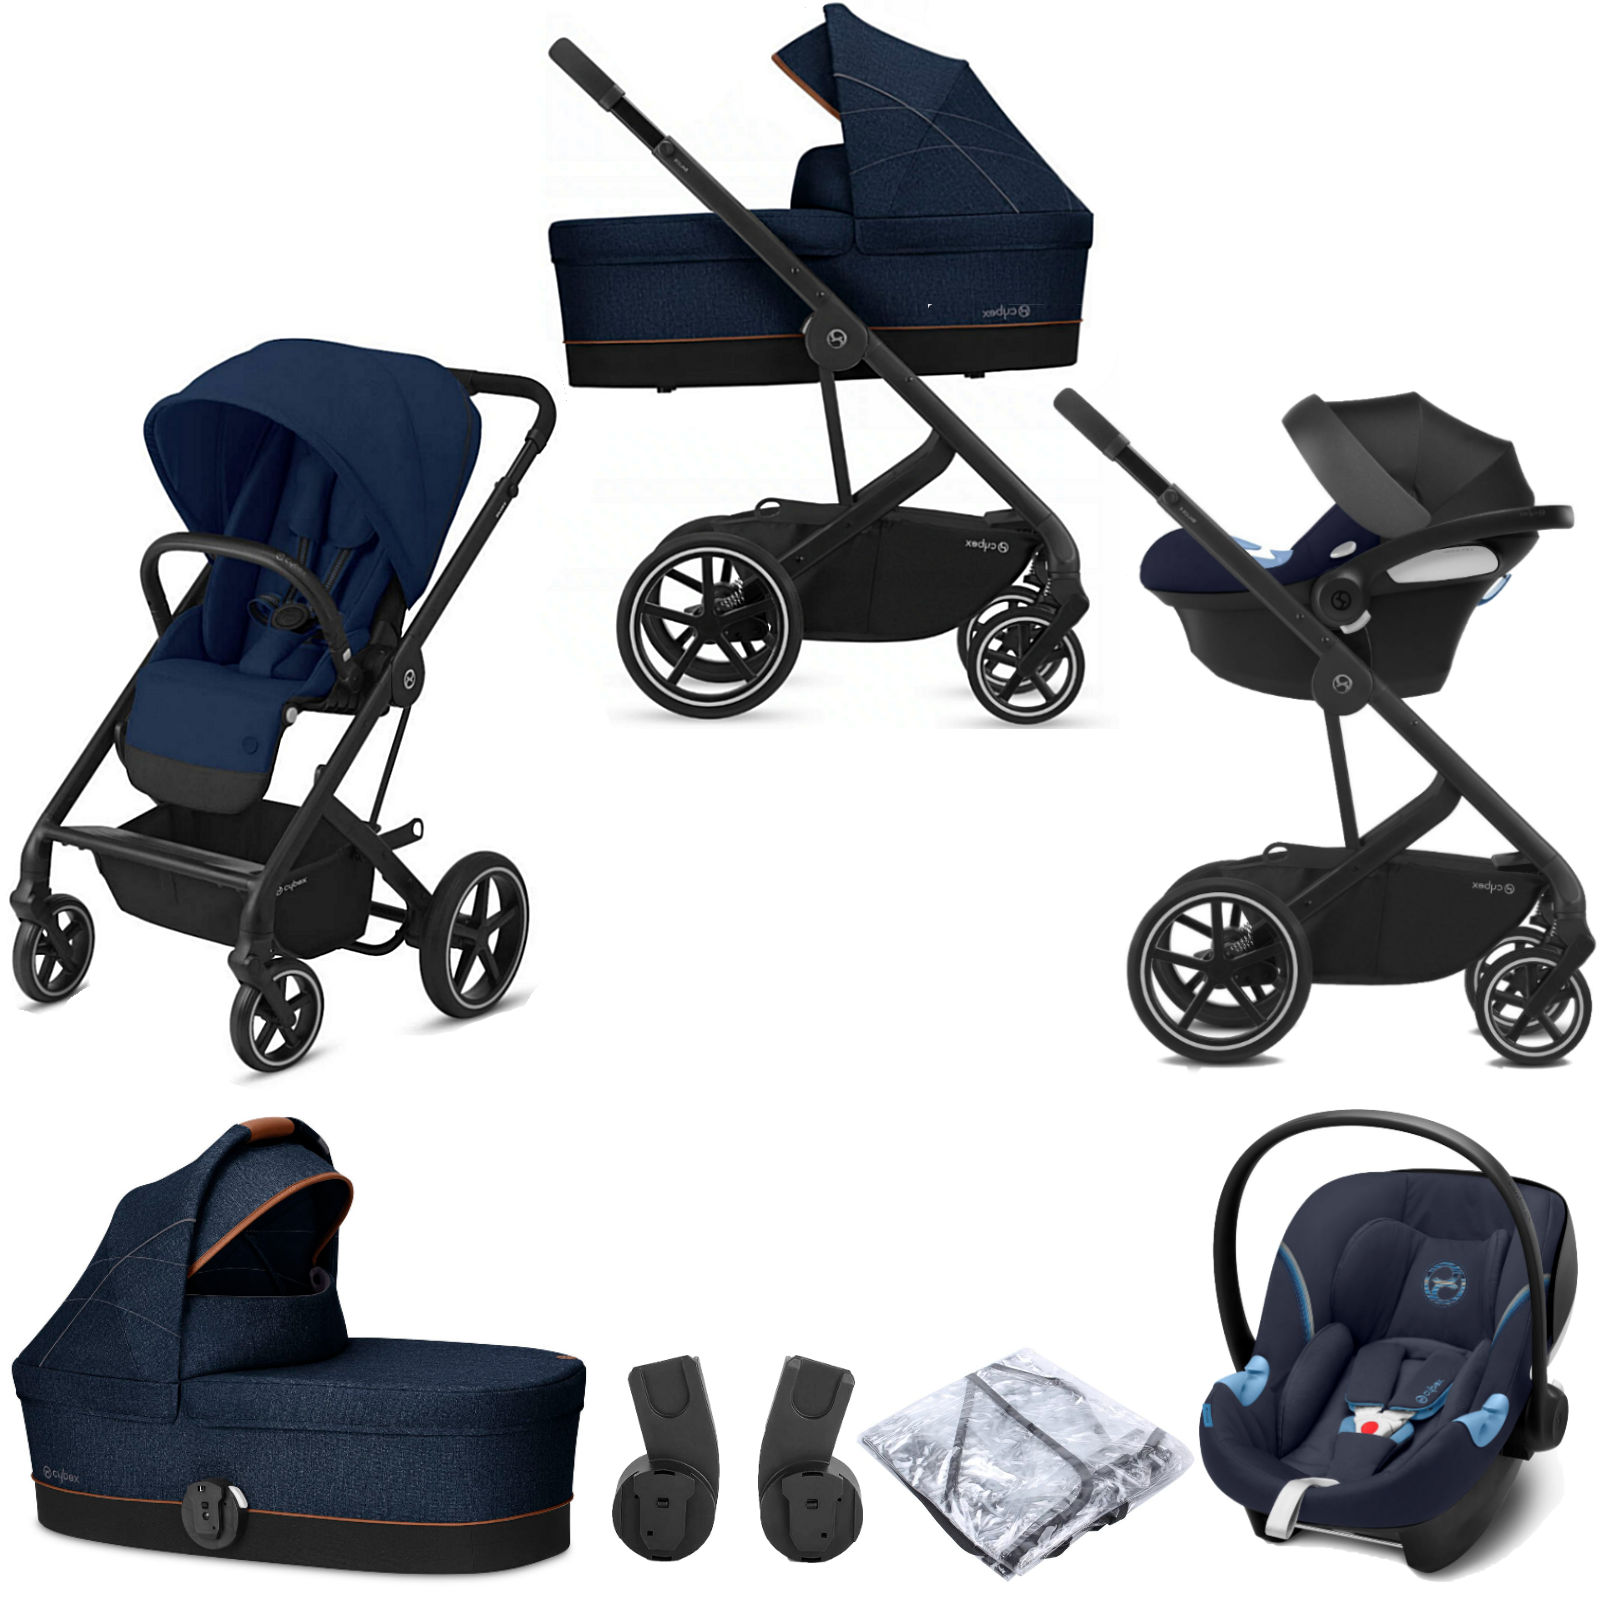 Cybex Balios S Lux (Aton M iSize) Travel System with